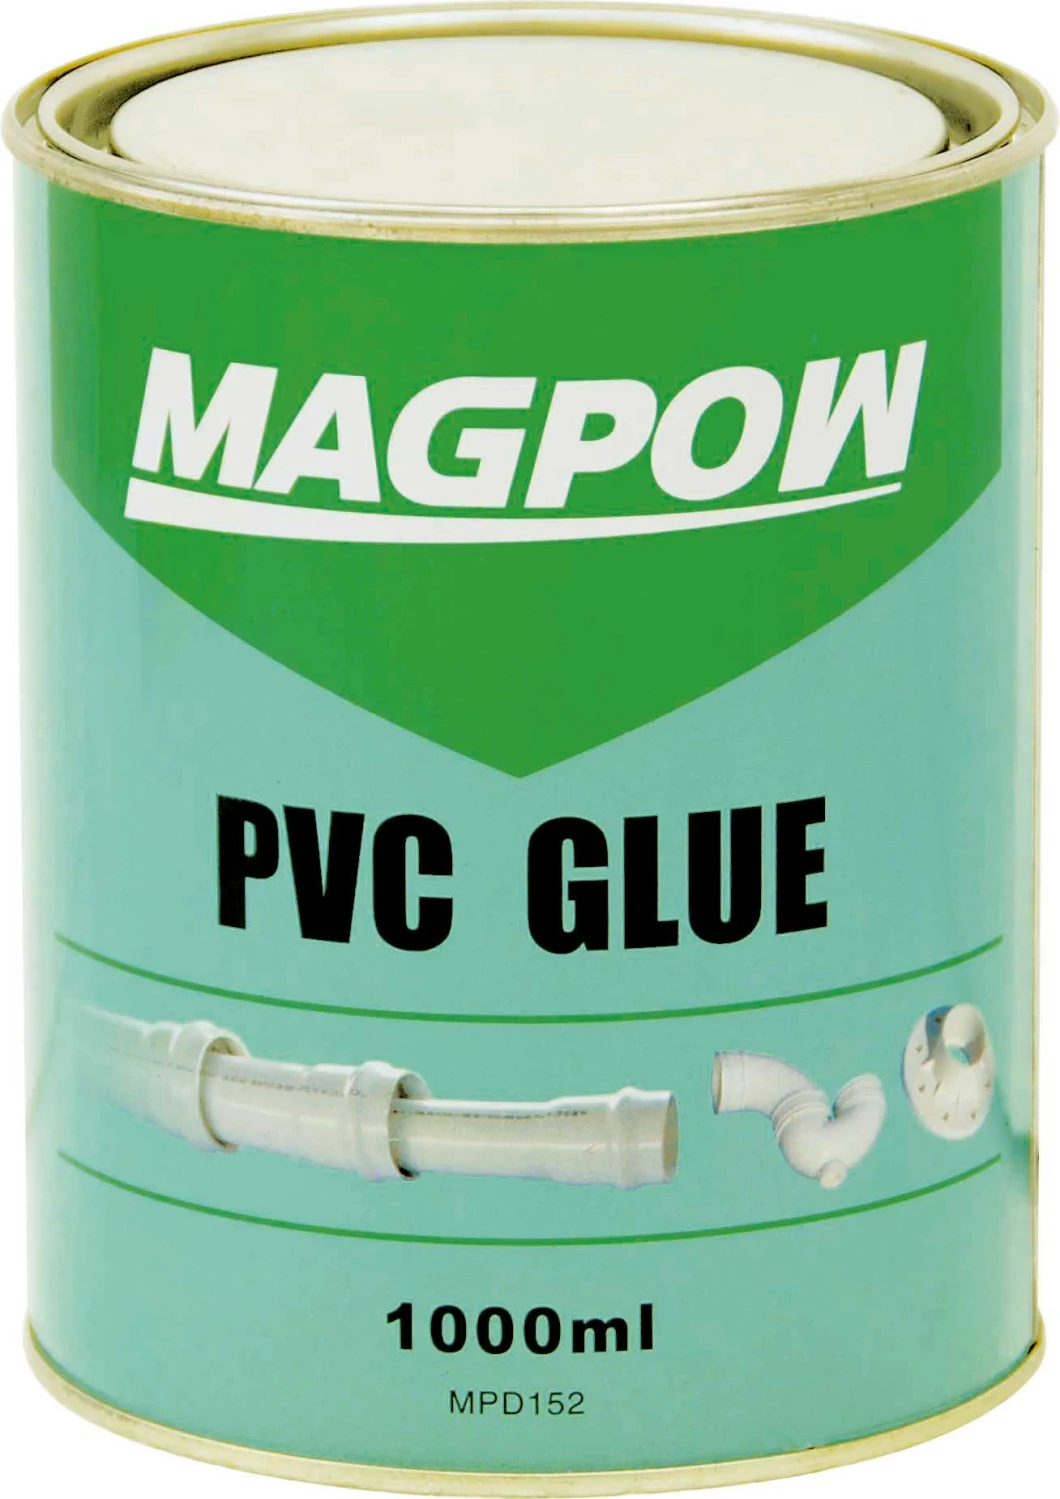 Strong Clear PVC Solvent Cement Glue for PVC Pipe Fittings